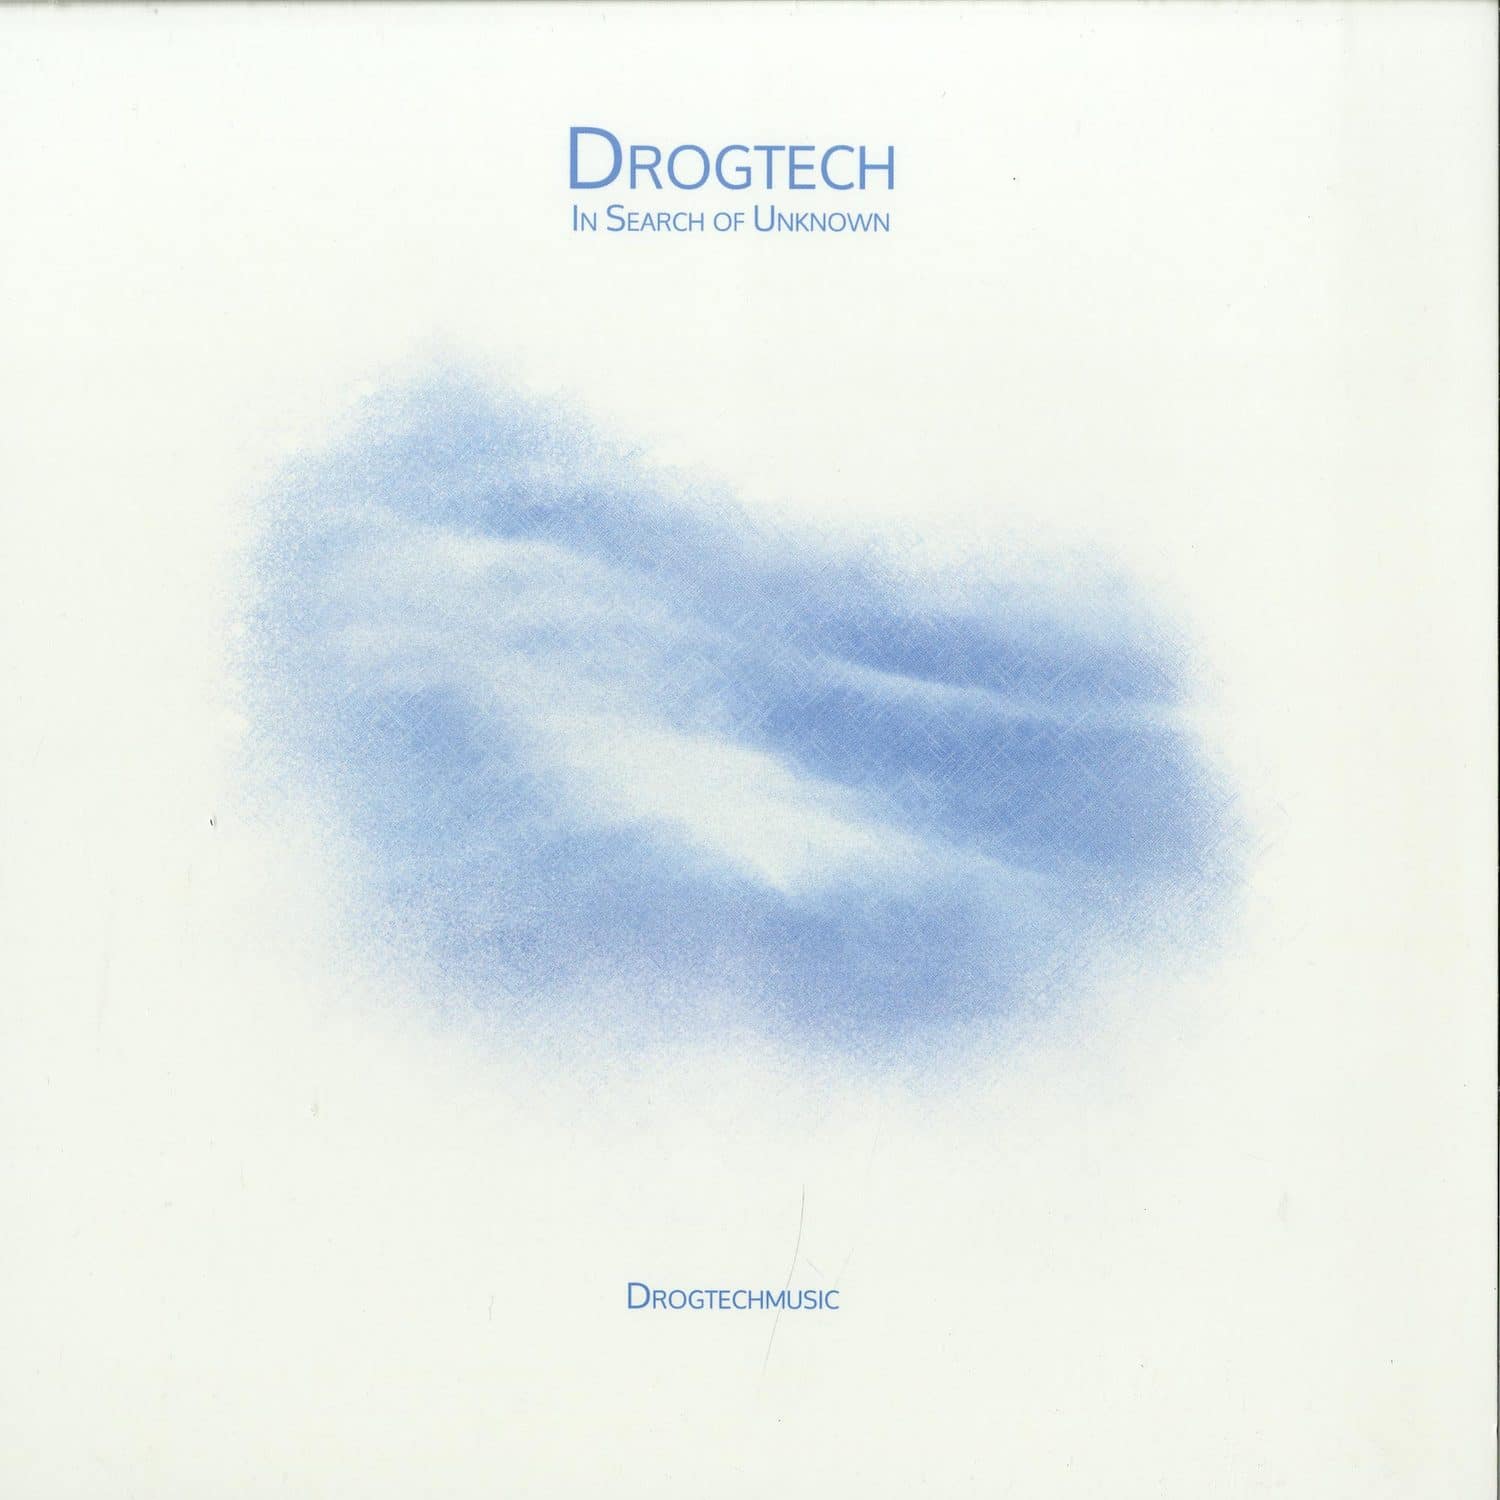 Drogtech - IN SEARCH OF UNKNOWN 